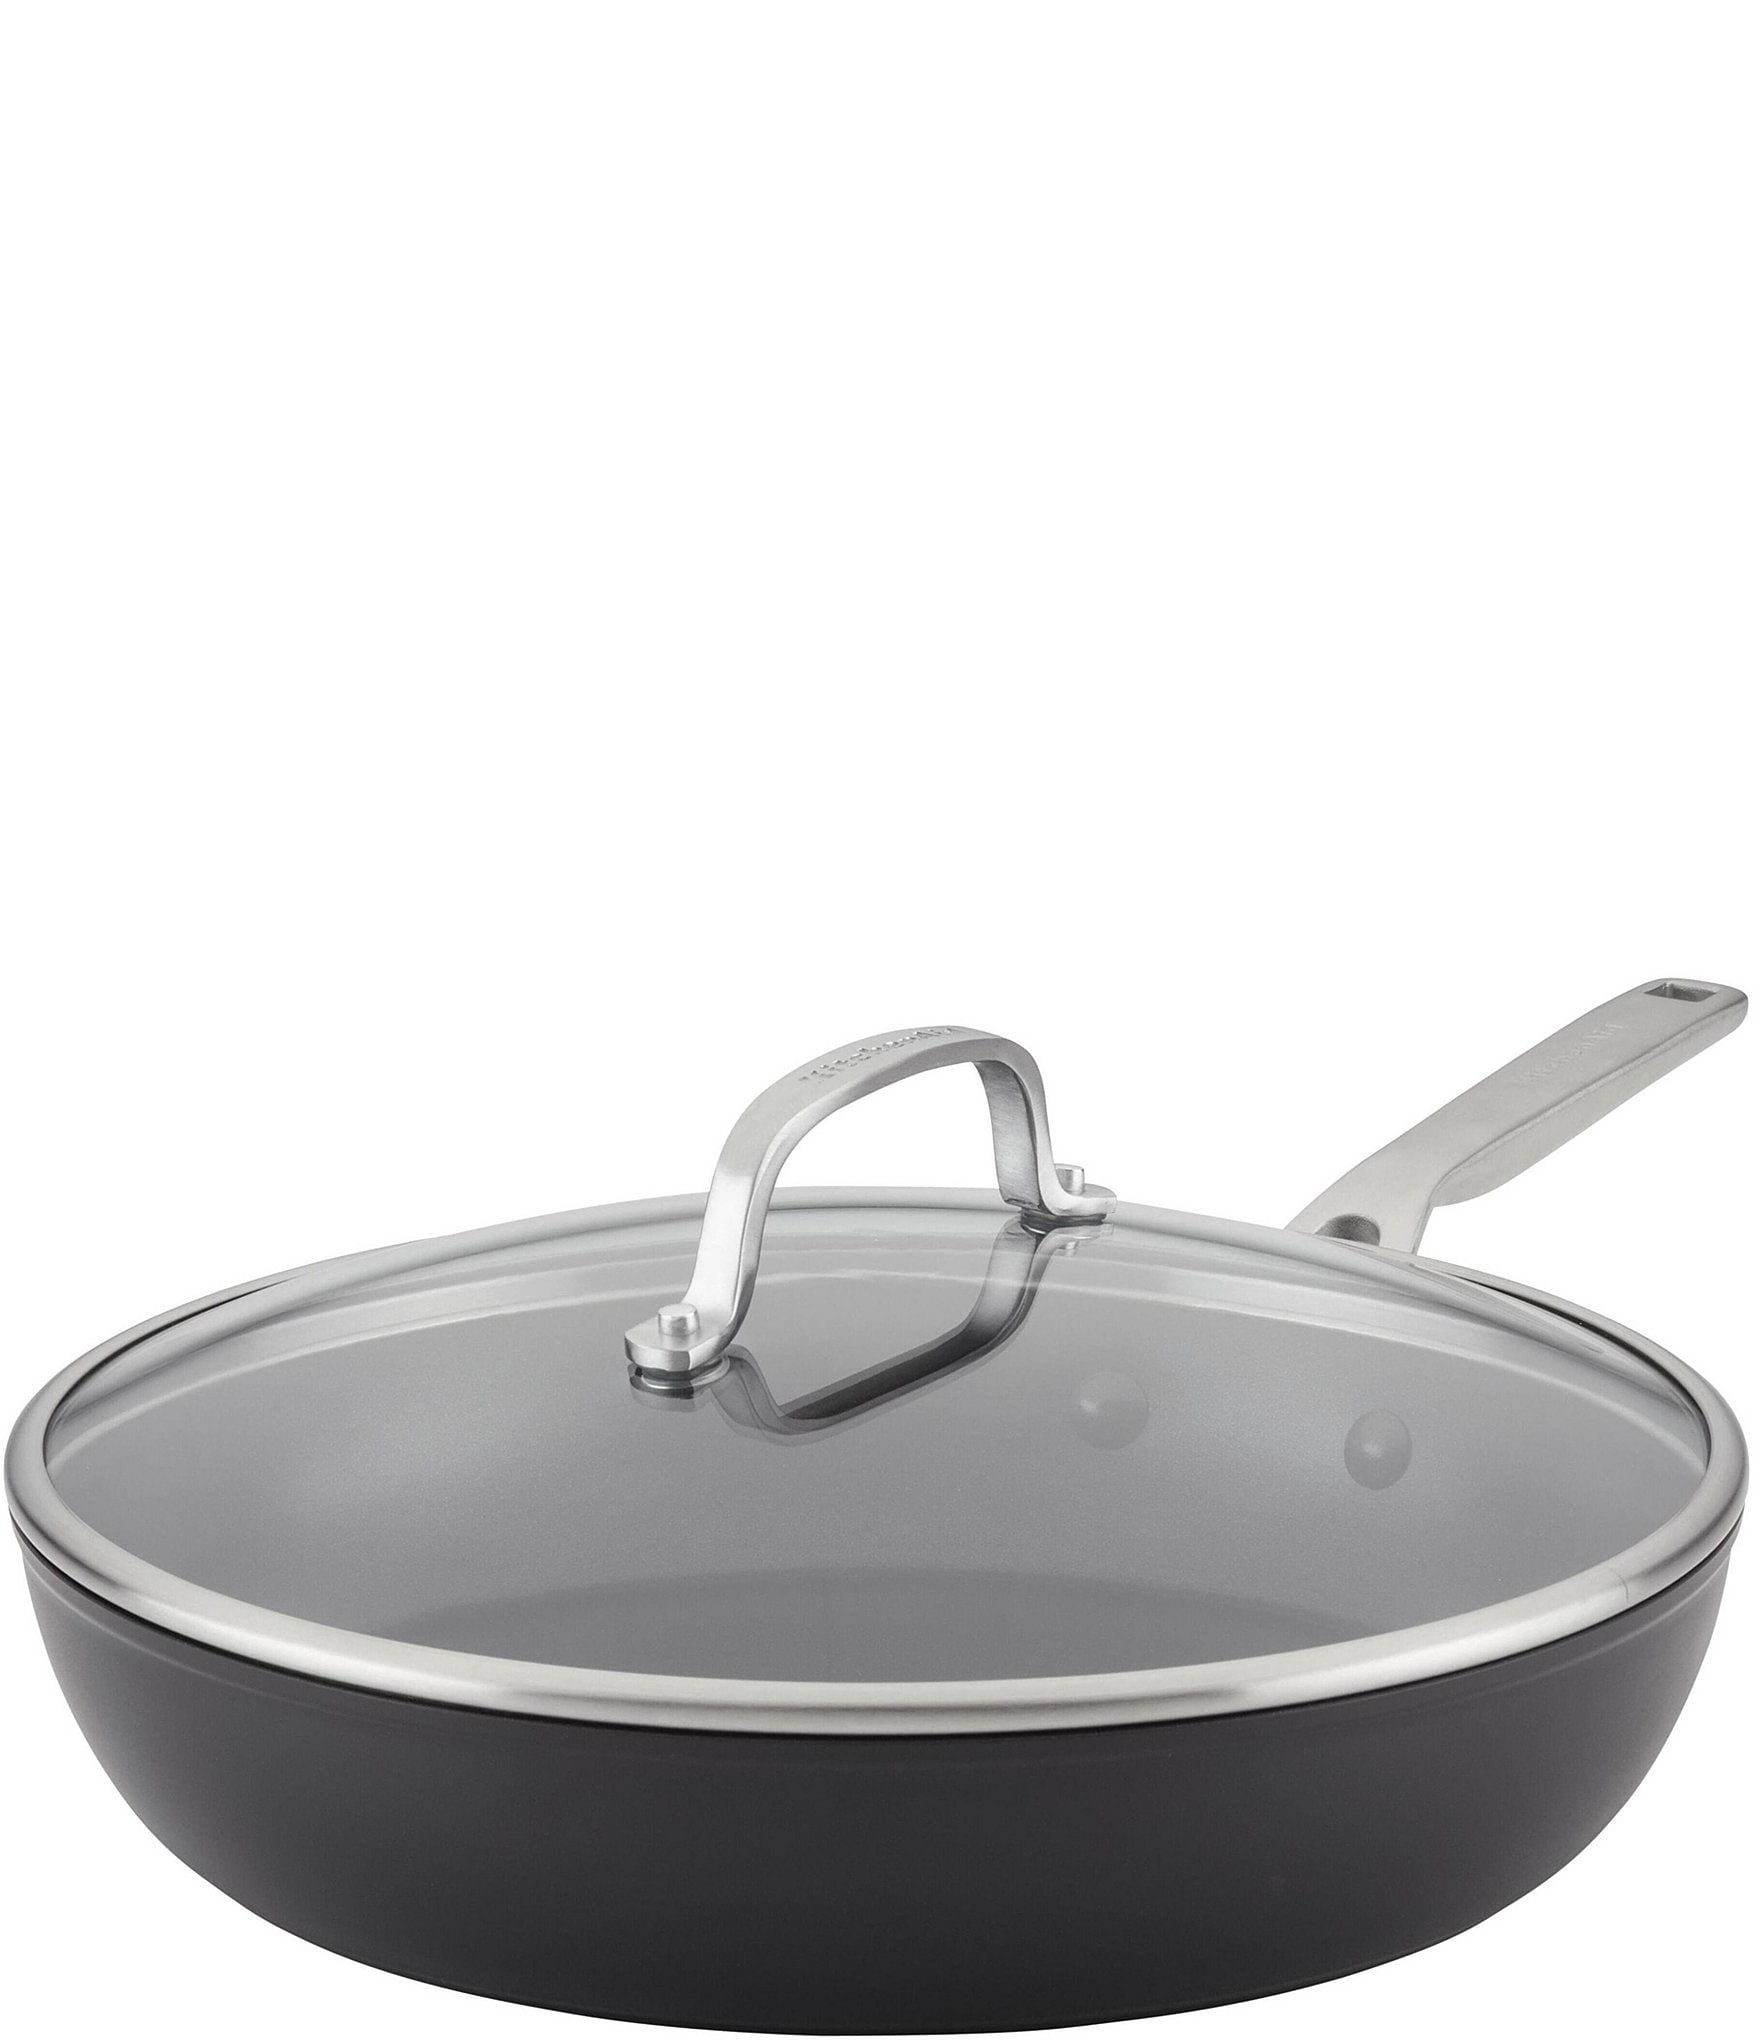 KitchenAid Hard Anodized Induction Nonstick Fry Pan/skillet With